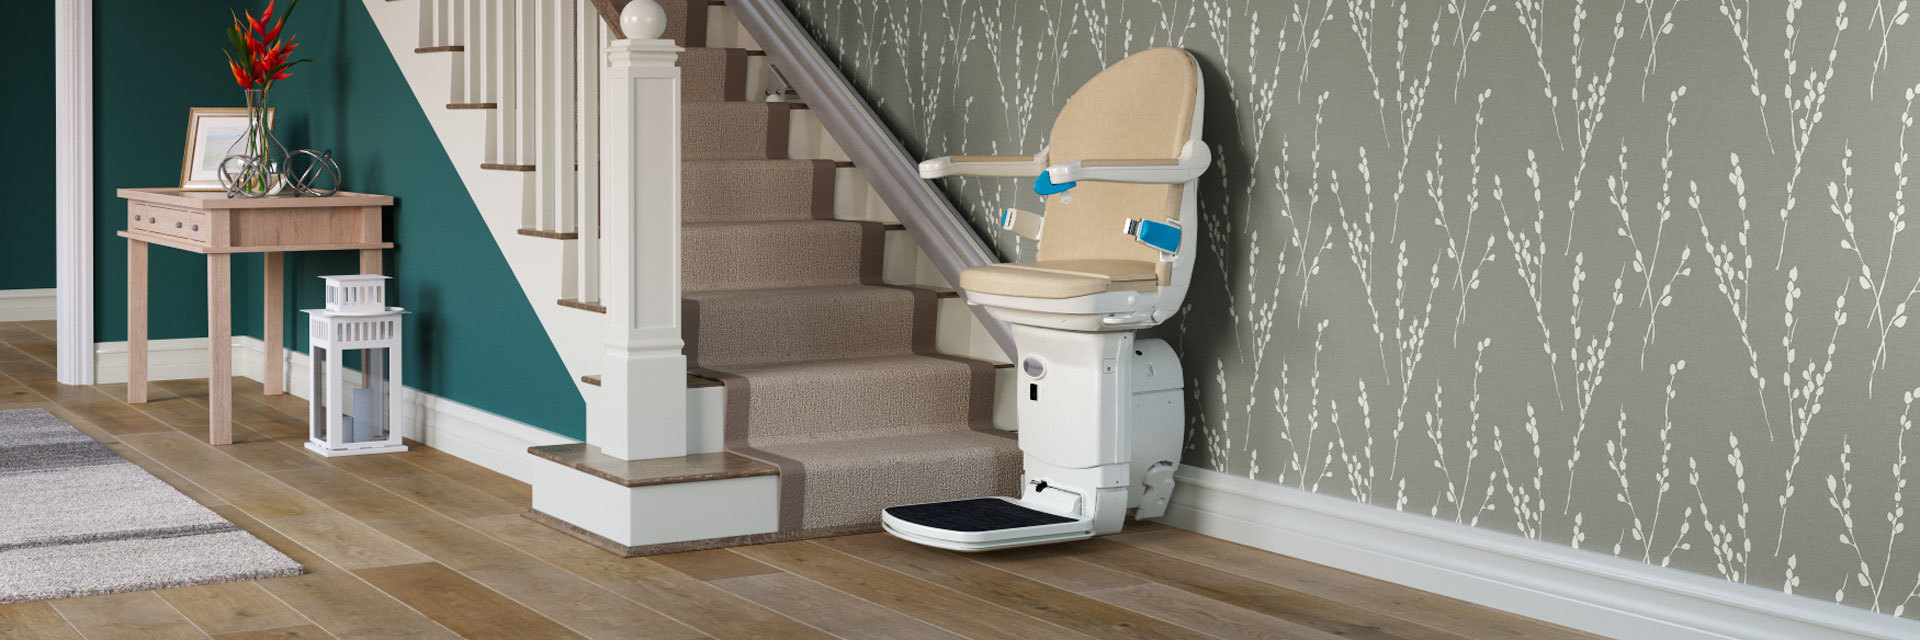 Affordable chair stairway staircase glide